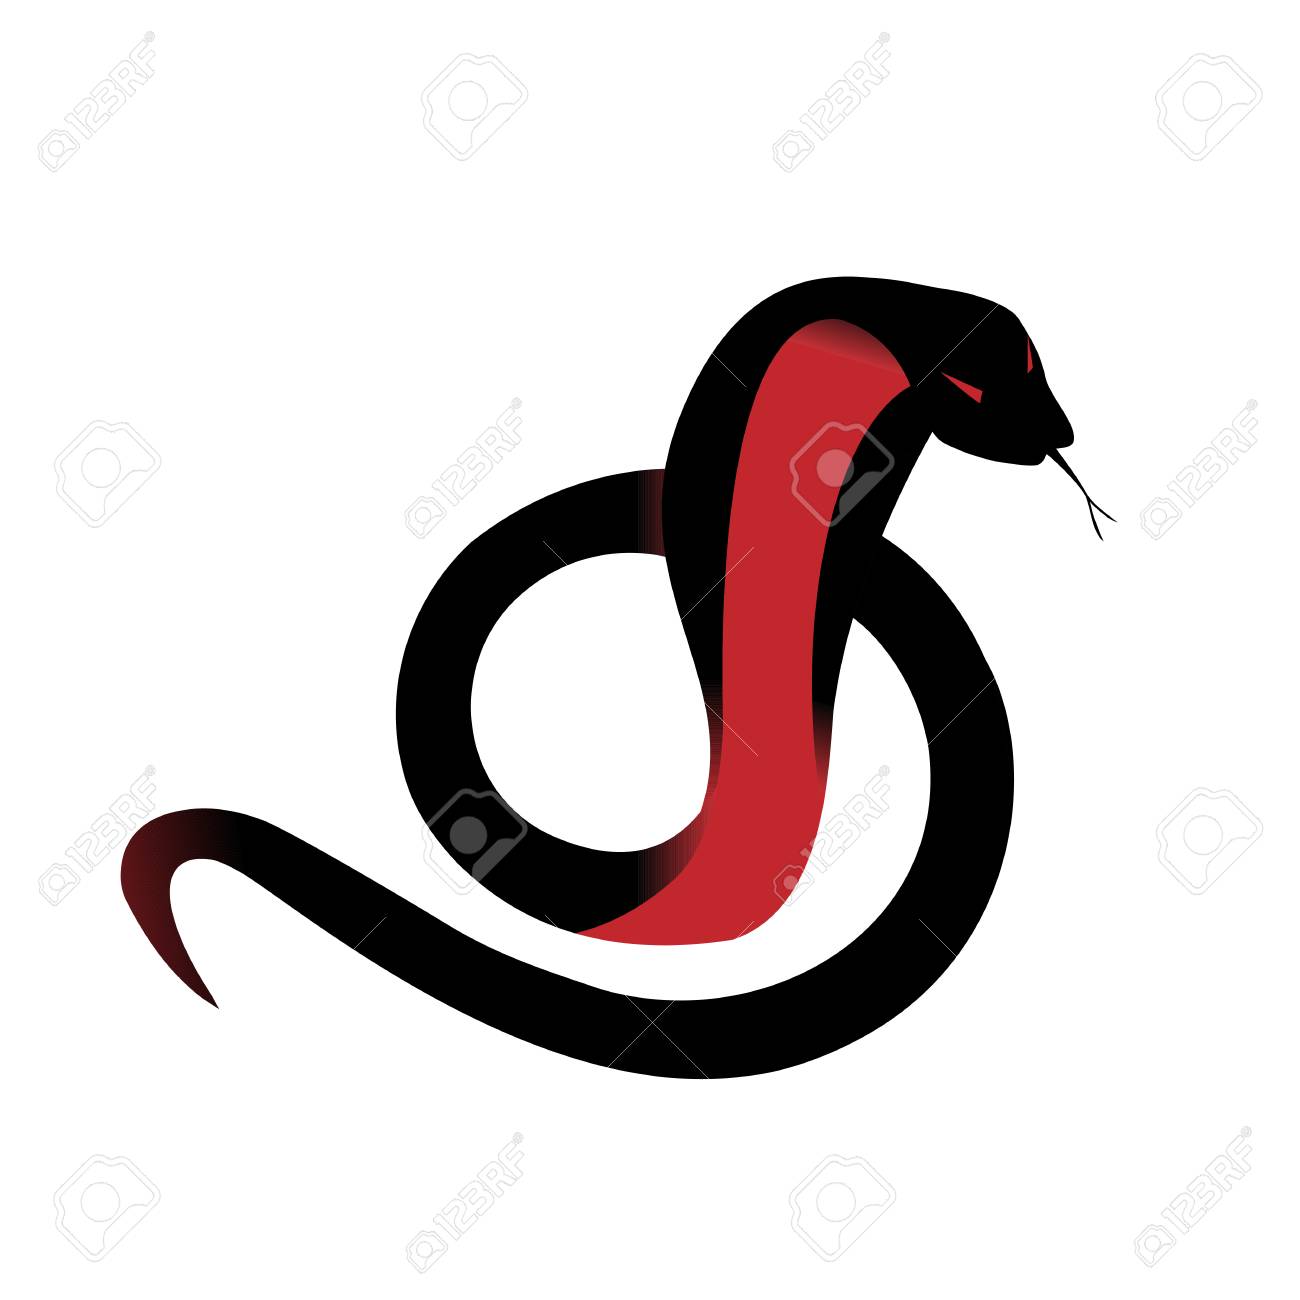 Serpent Clipart s shaped snake